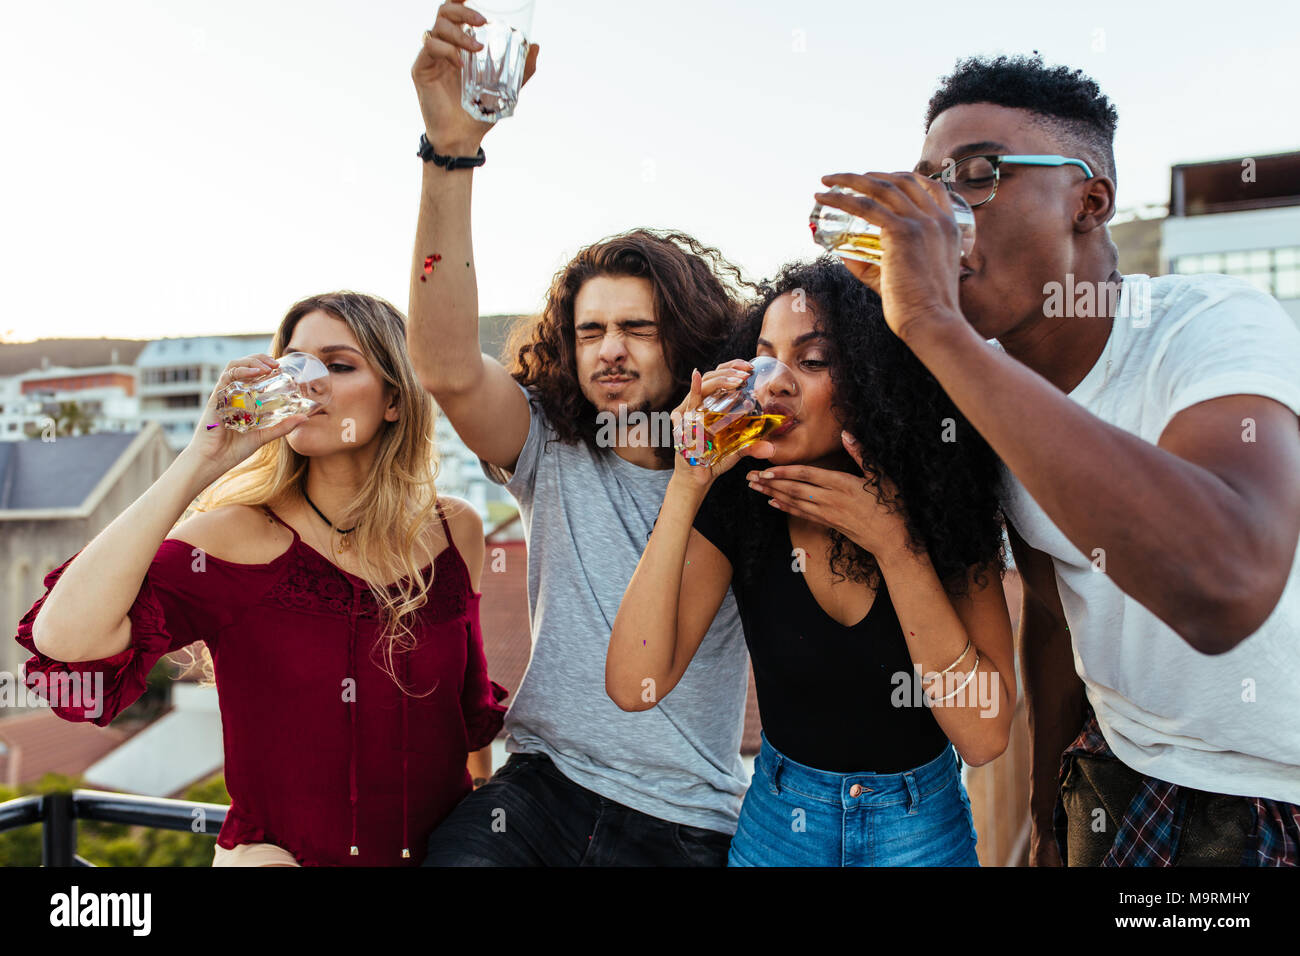 Group of young friends drinking and enjoying an evening on rooftop. Multiracial men and woman drinking at rooftop party. Stock Photo